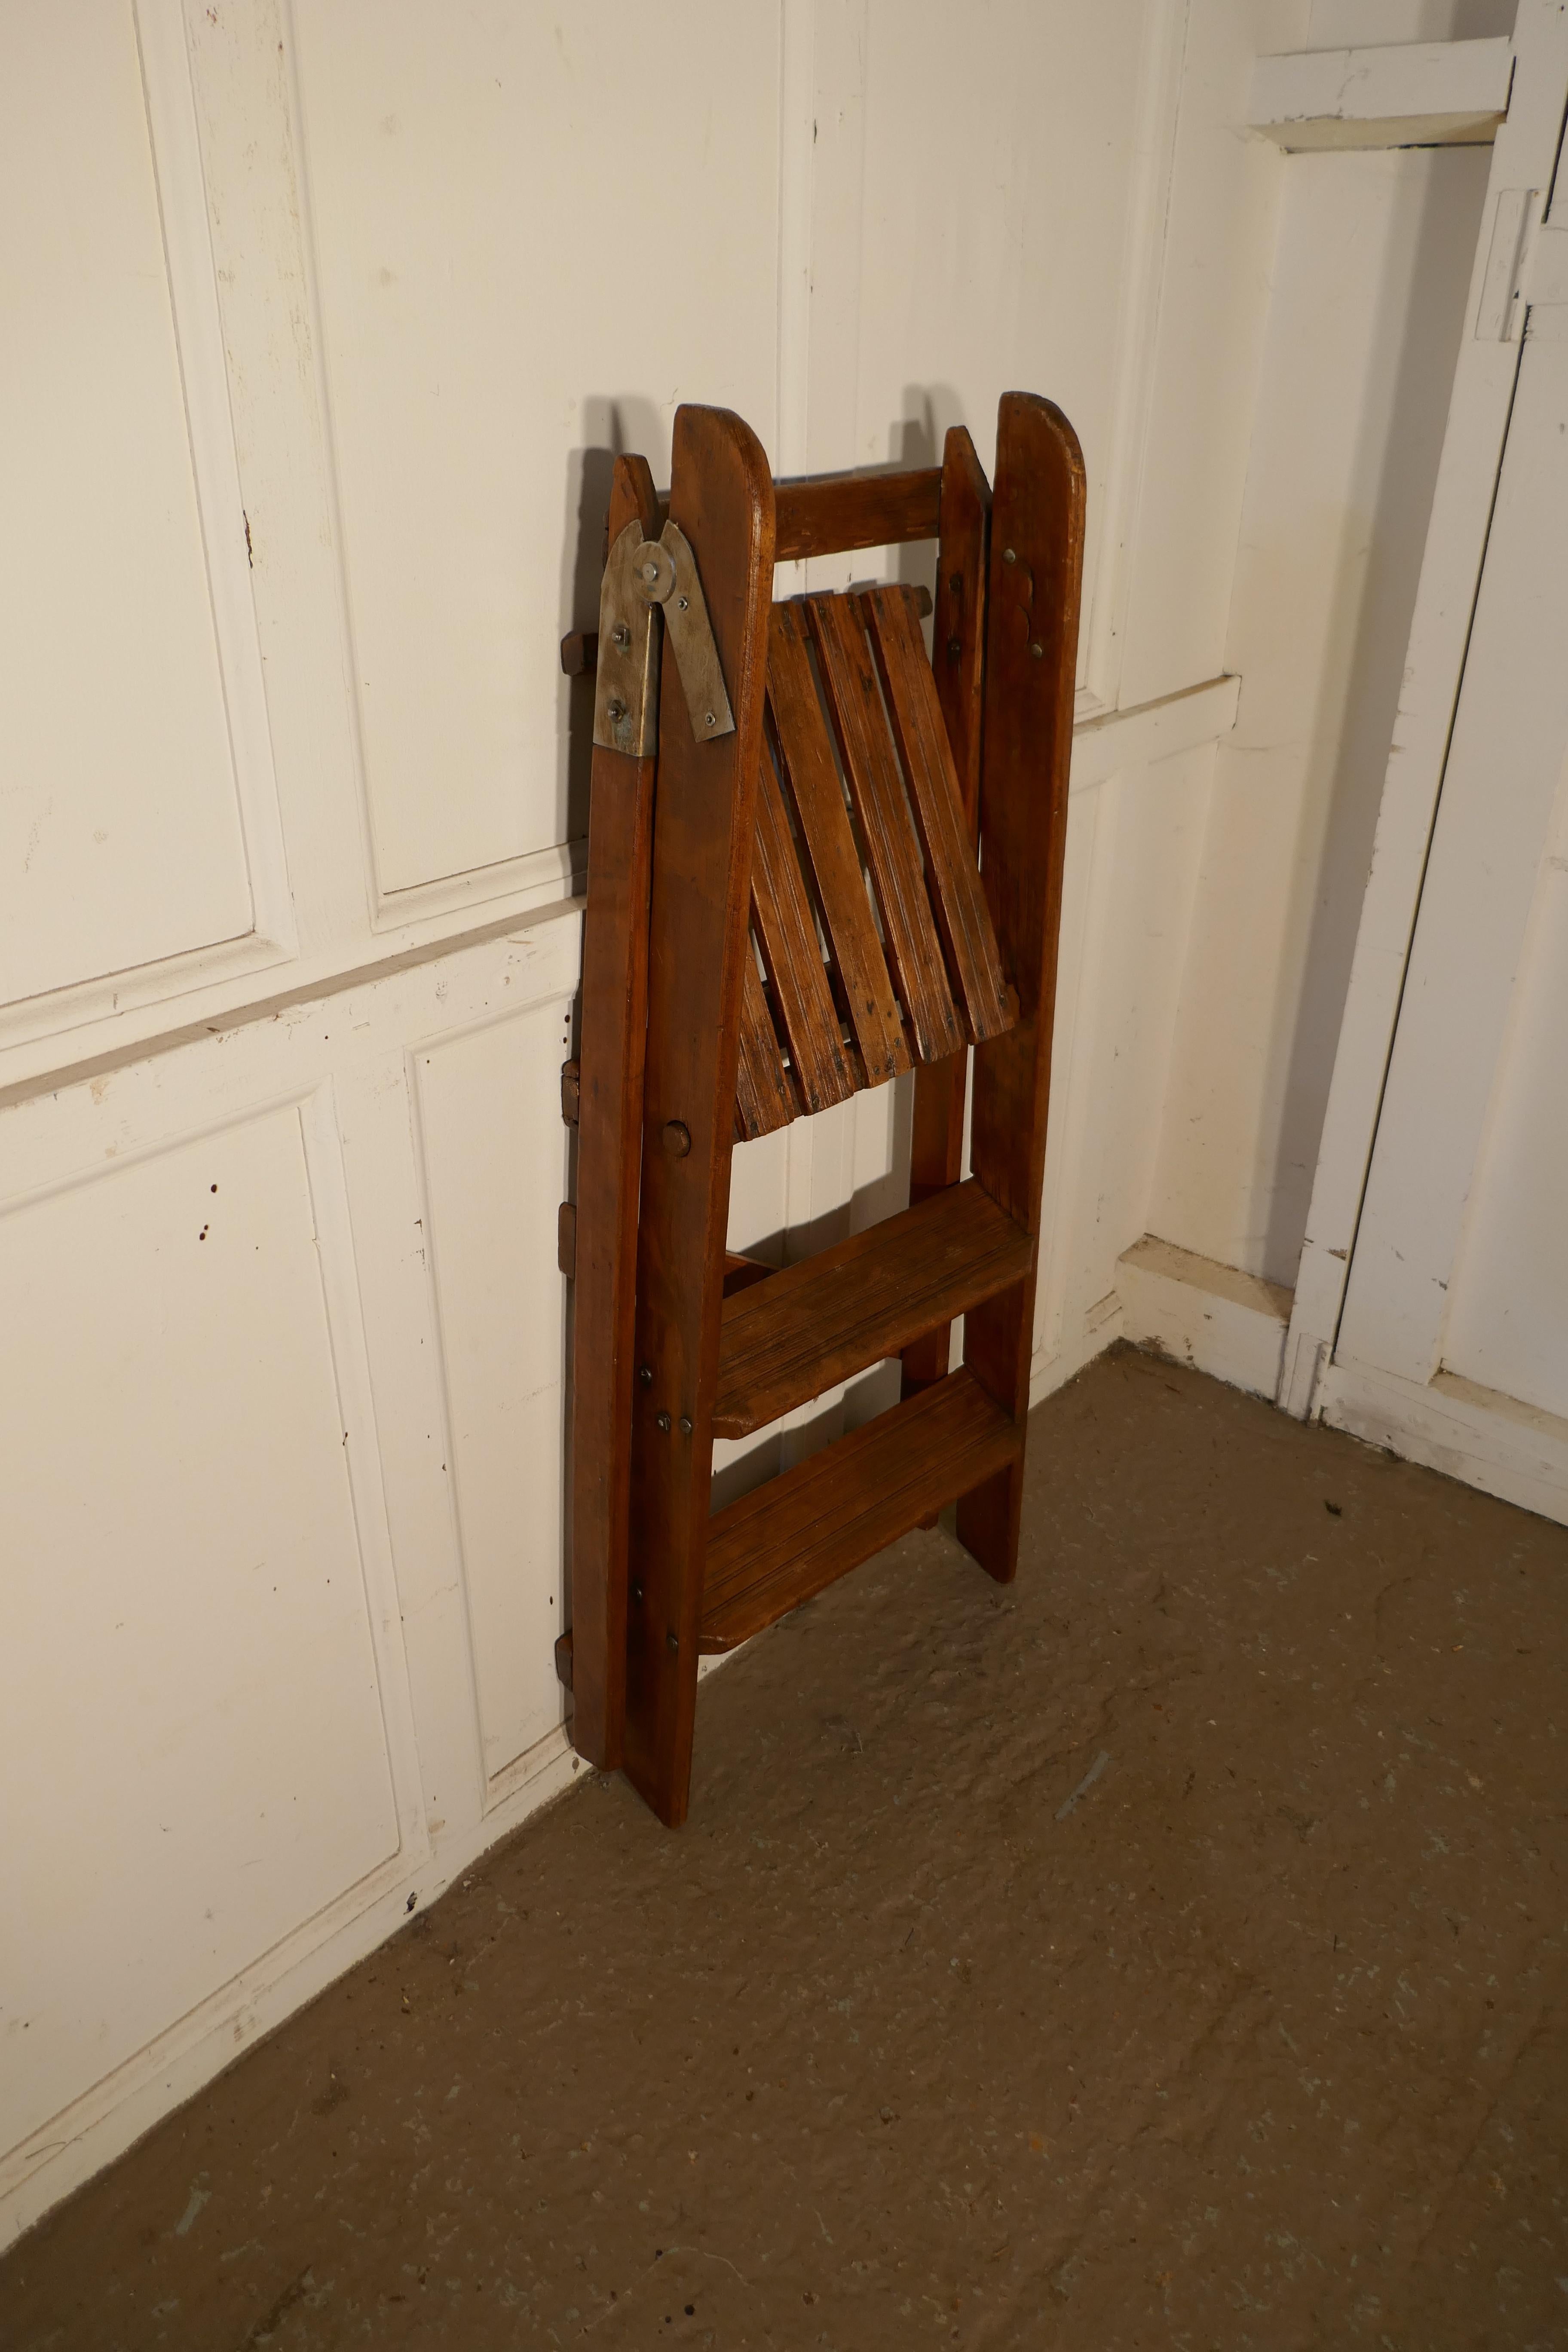 Easy action pine step kitchen step ladder 

This is a very useful and attractive piece, the step ladder has 3” treads, it folds flat for handy storage and would work well in a kitchen or shop, library or anywhere where a little extra height would